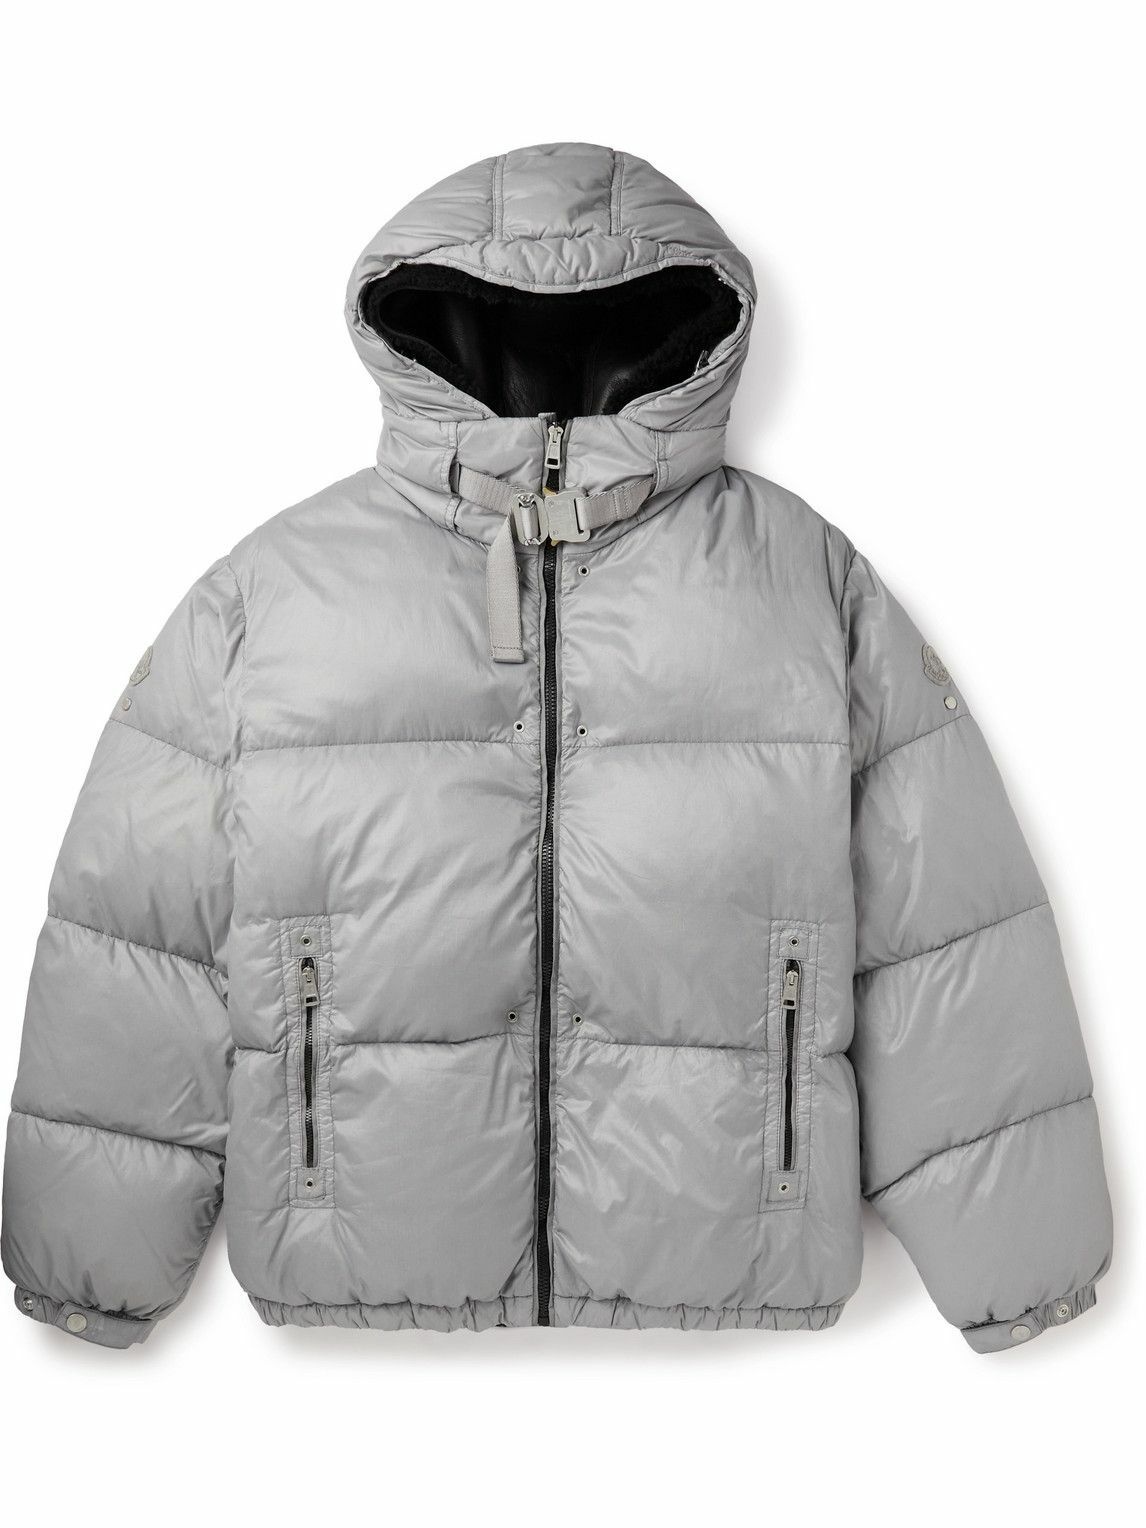 Photo: Moncler Genius - 6 Moncler 1017 ALYX 9SM Quilted Shell Hooded Down Jacket - Gray